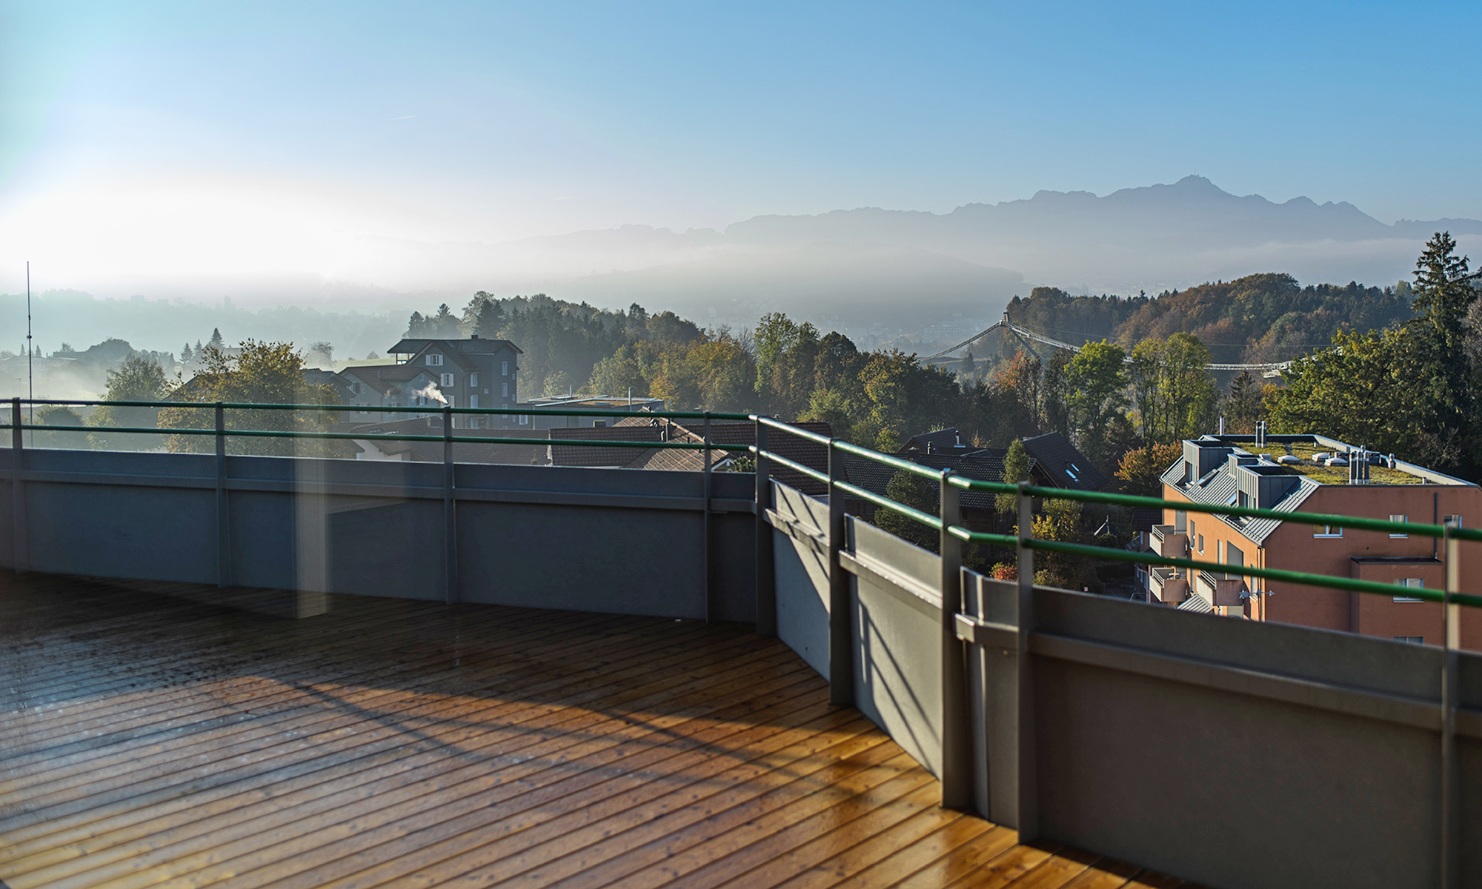 Photograph from the roof terrace of the Berg apartment building with wooden flooring and spectacular panoramic mountain views above the rooftops